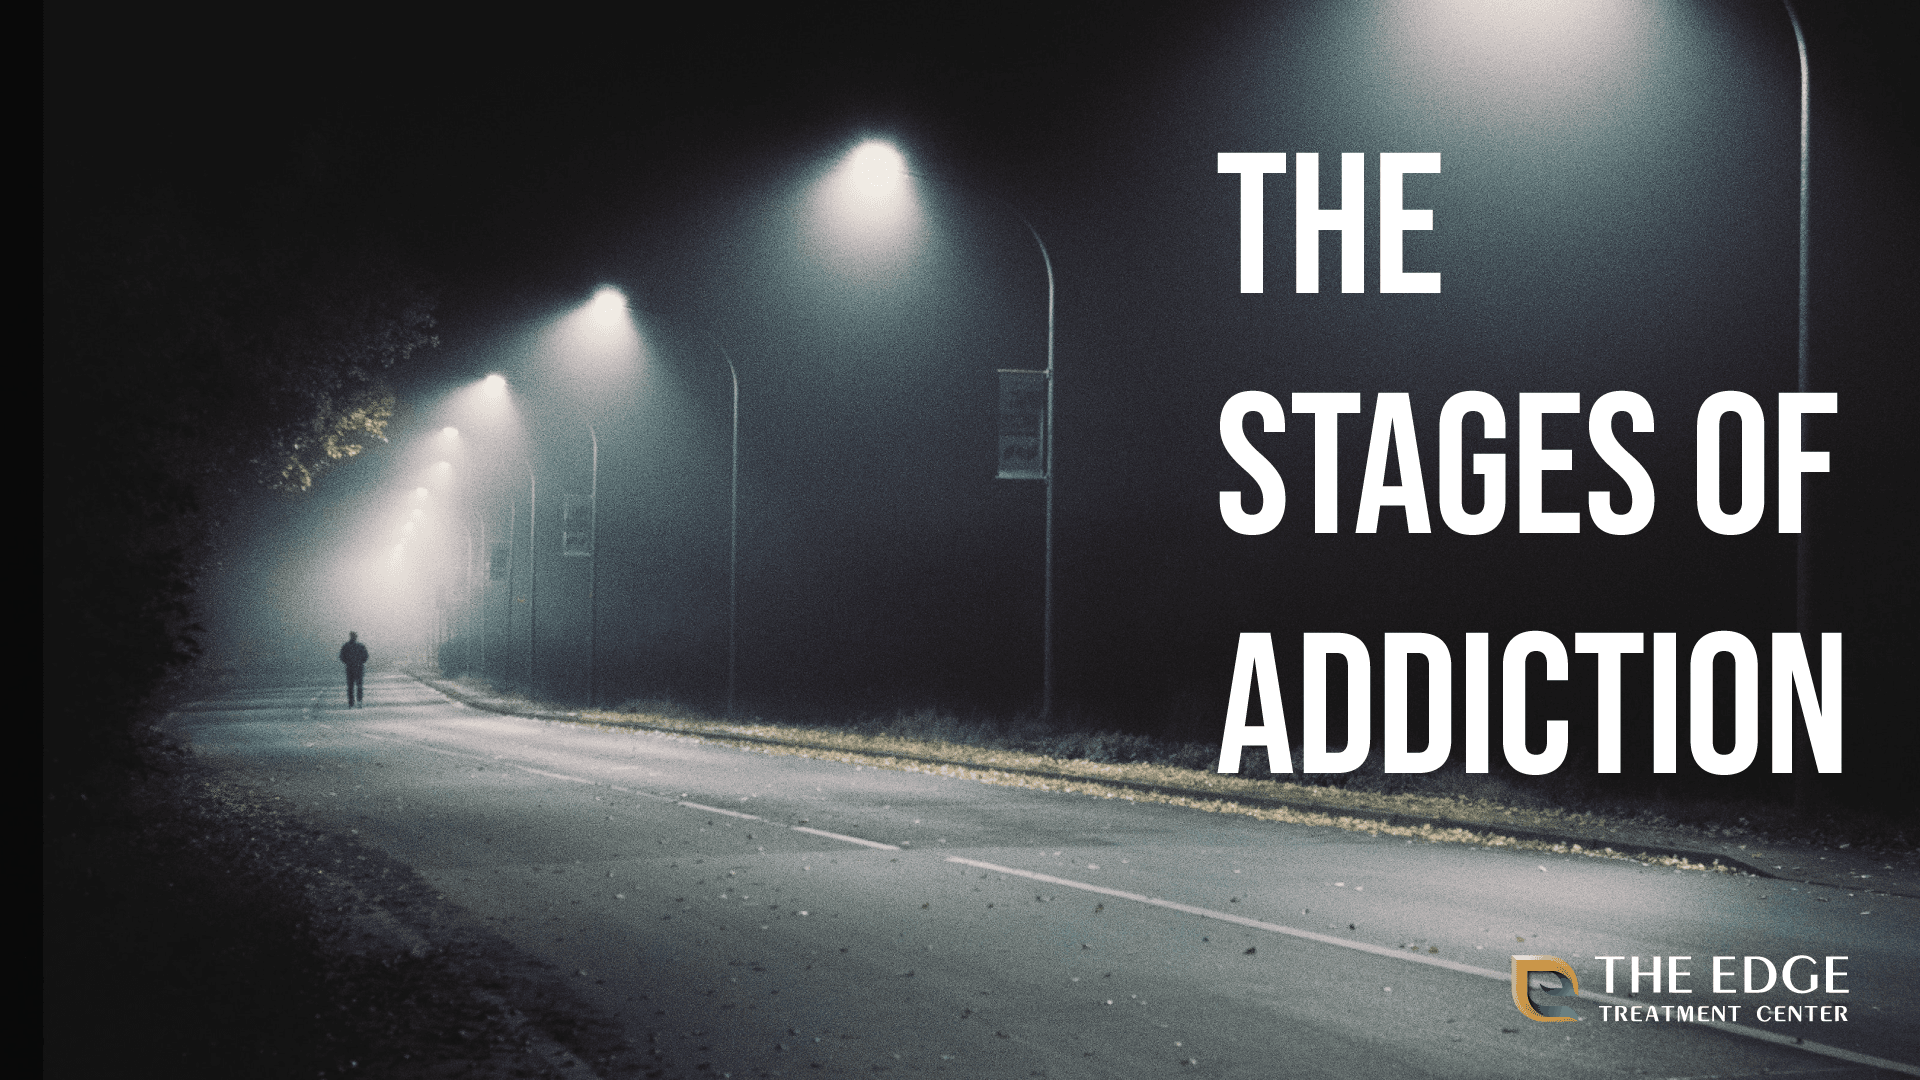 What are the Stages of Addiction?